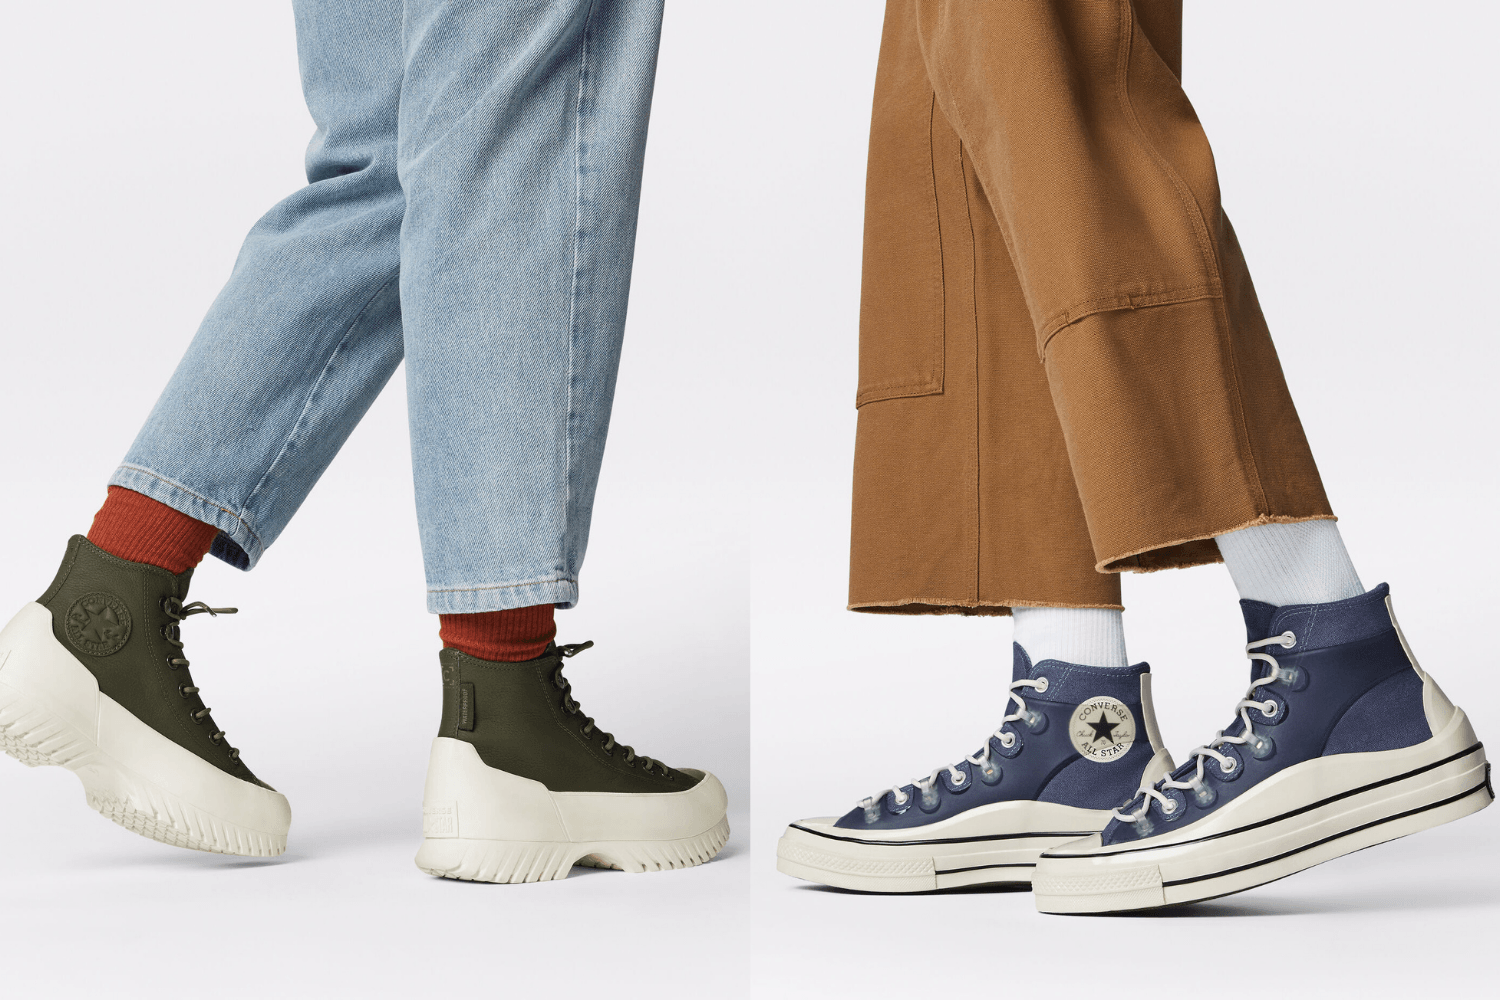 The Black Friday Sale at Converse